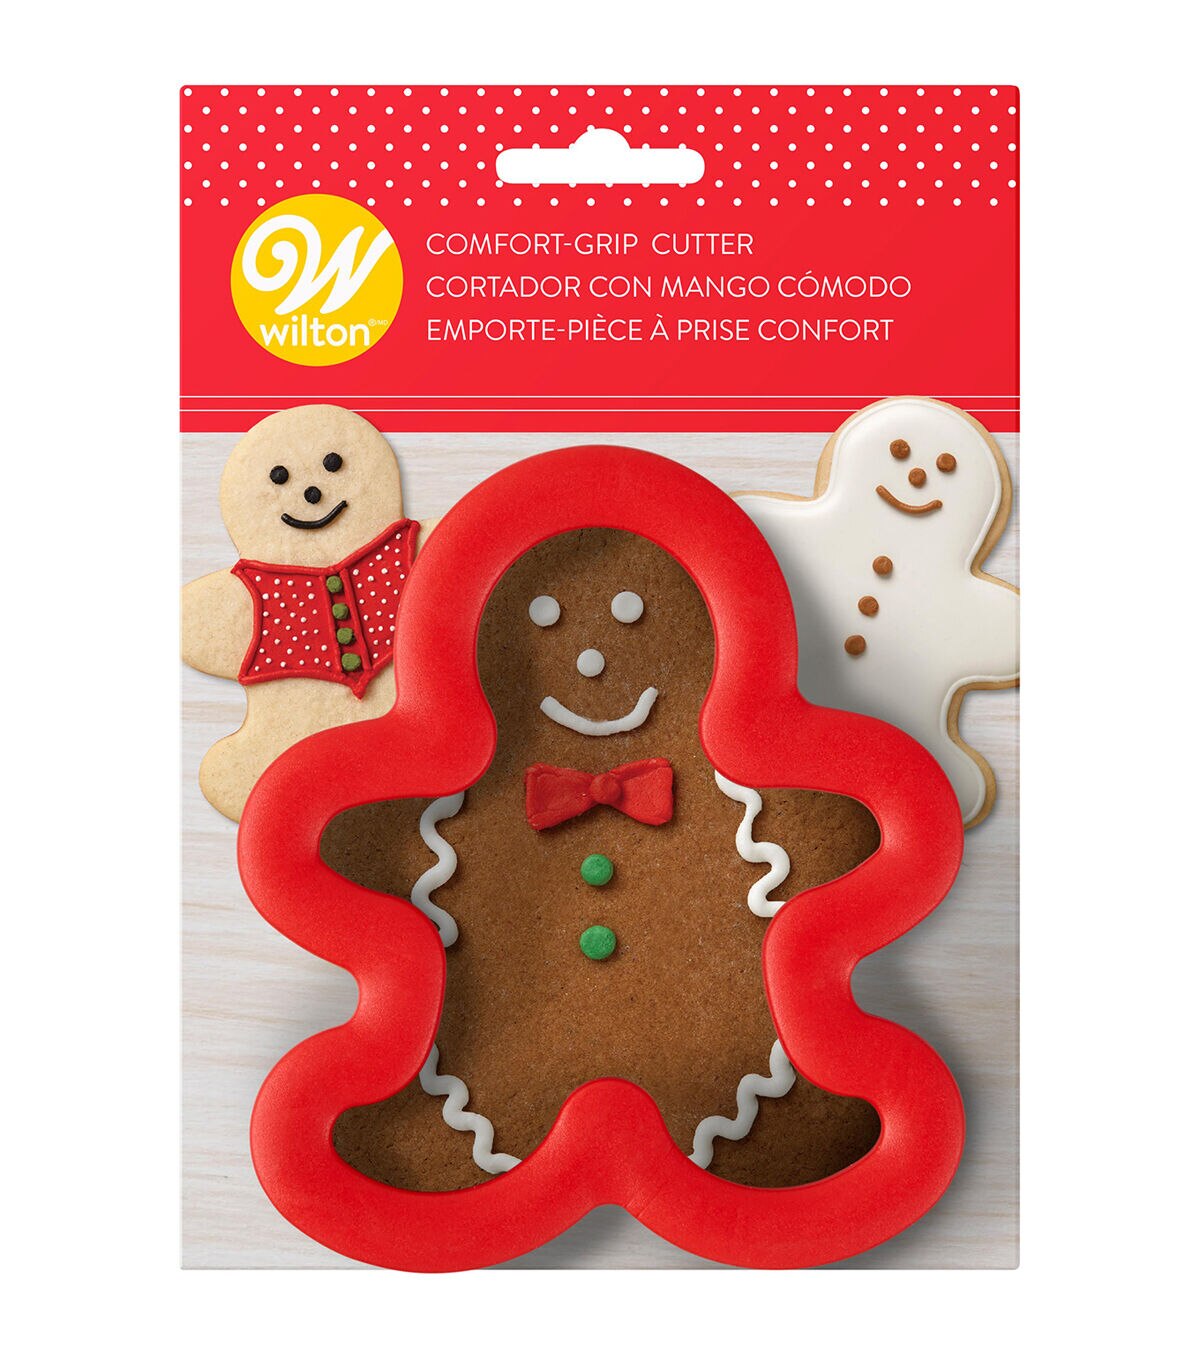 NEW WILTON COMFORT GRIP CUTTER GINGERBREAD MAN BOY COOKIE CHRISTMAS HOLIDAY RED 